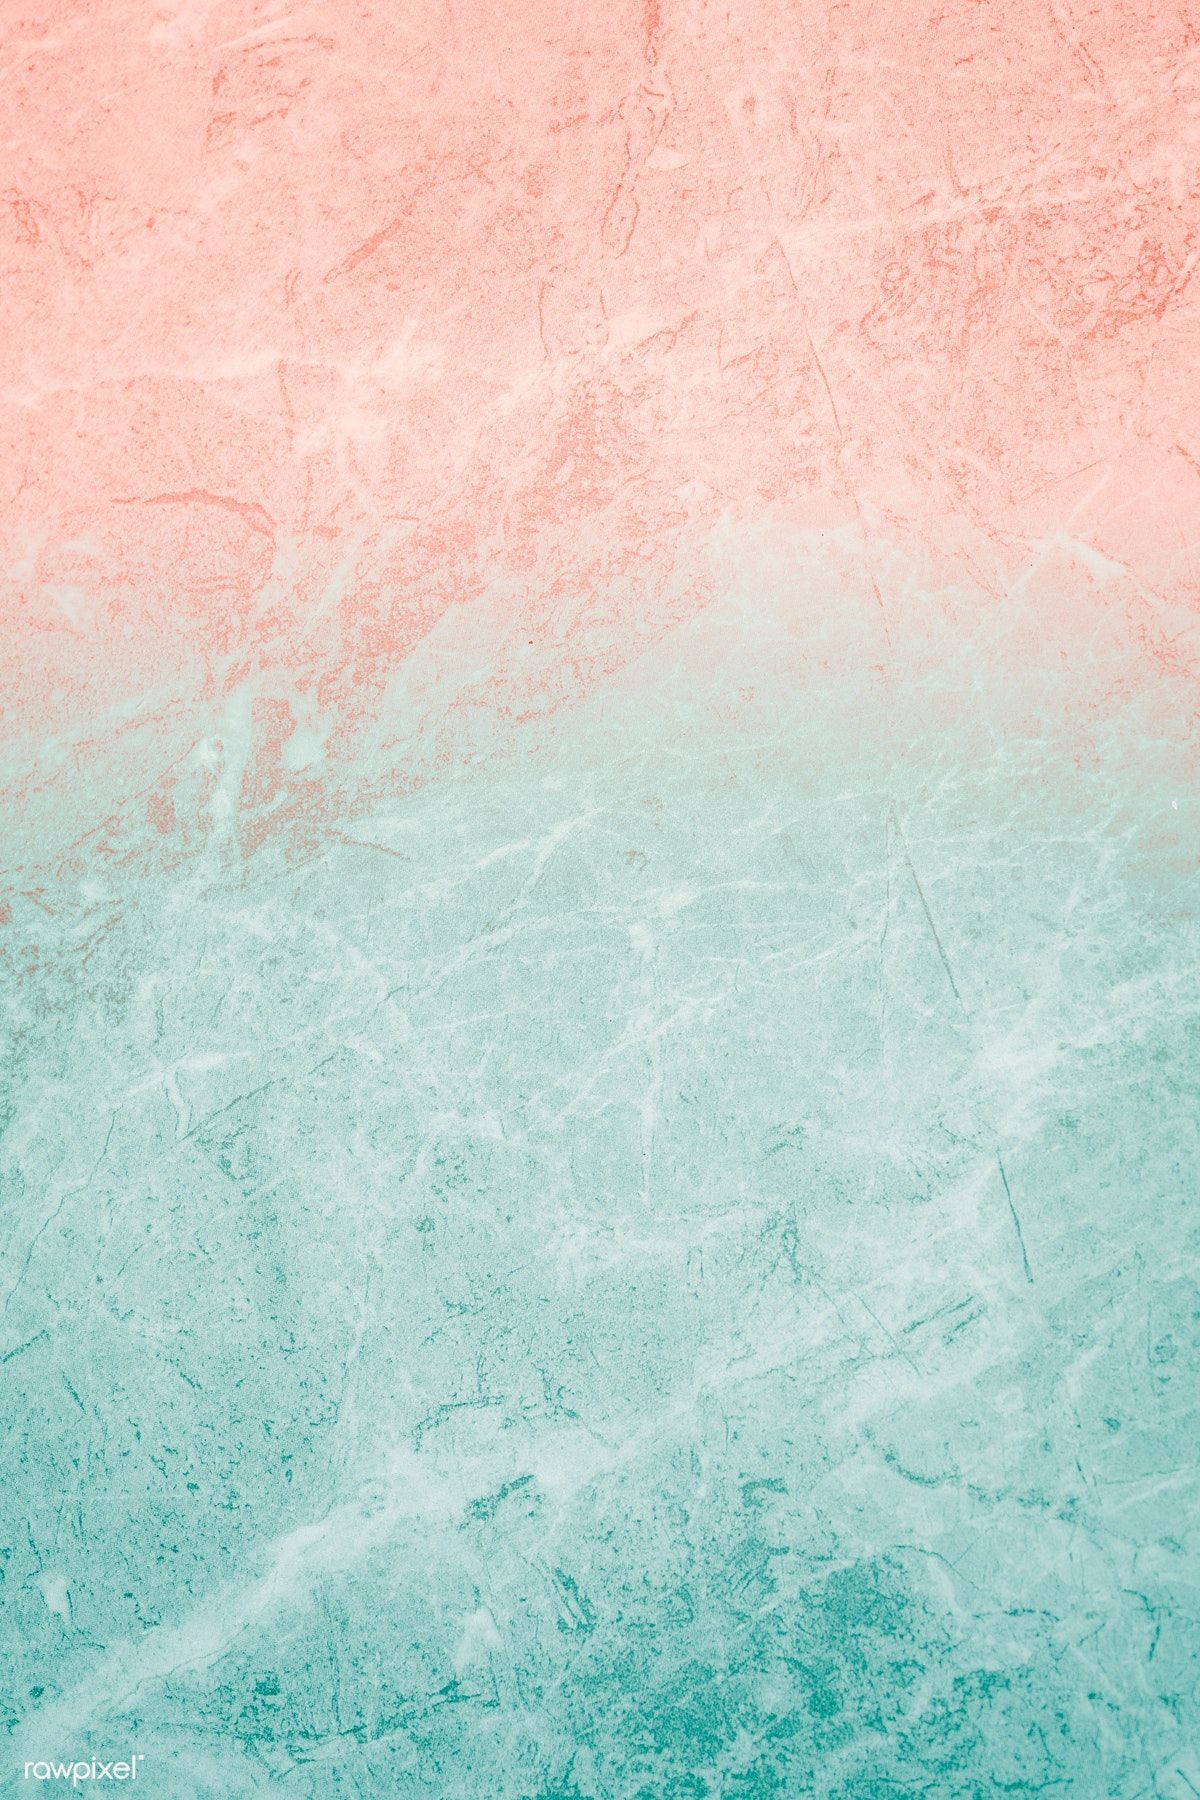 A pink and blue background with white text - Coral